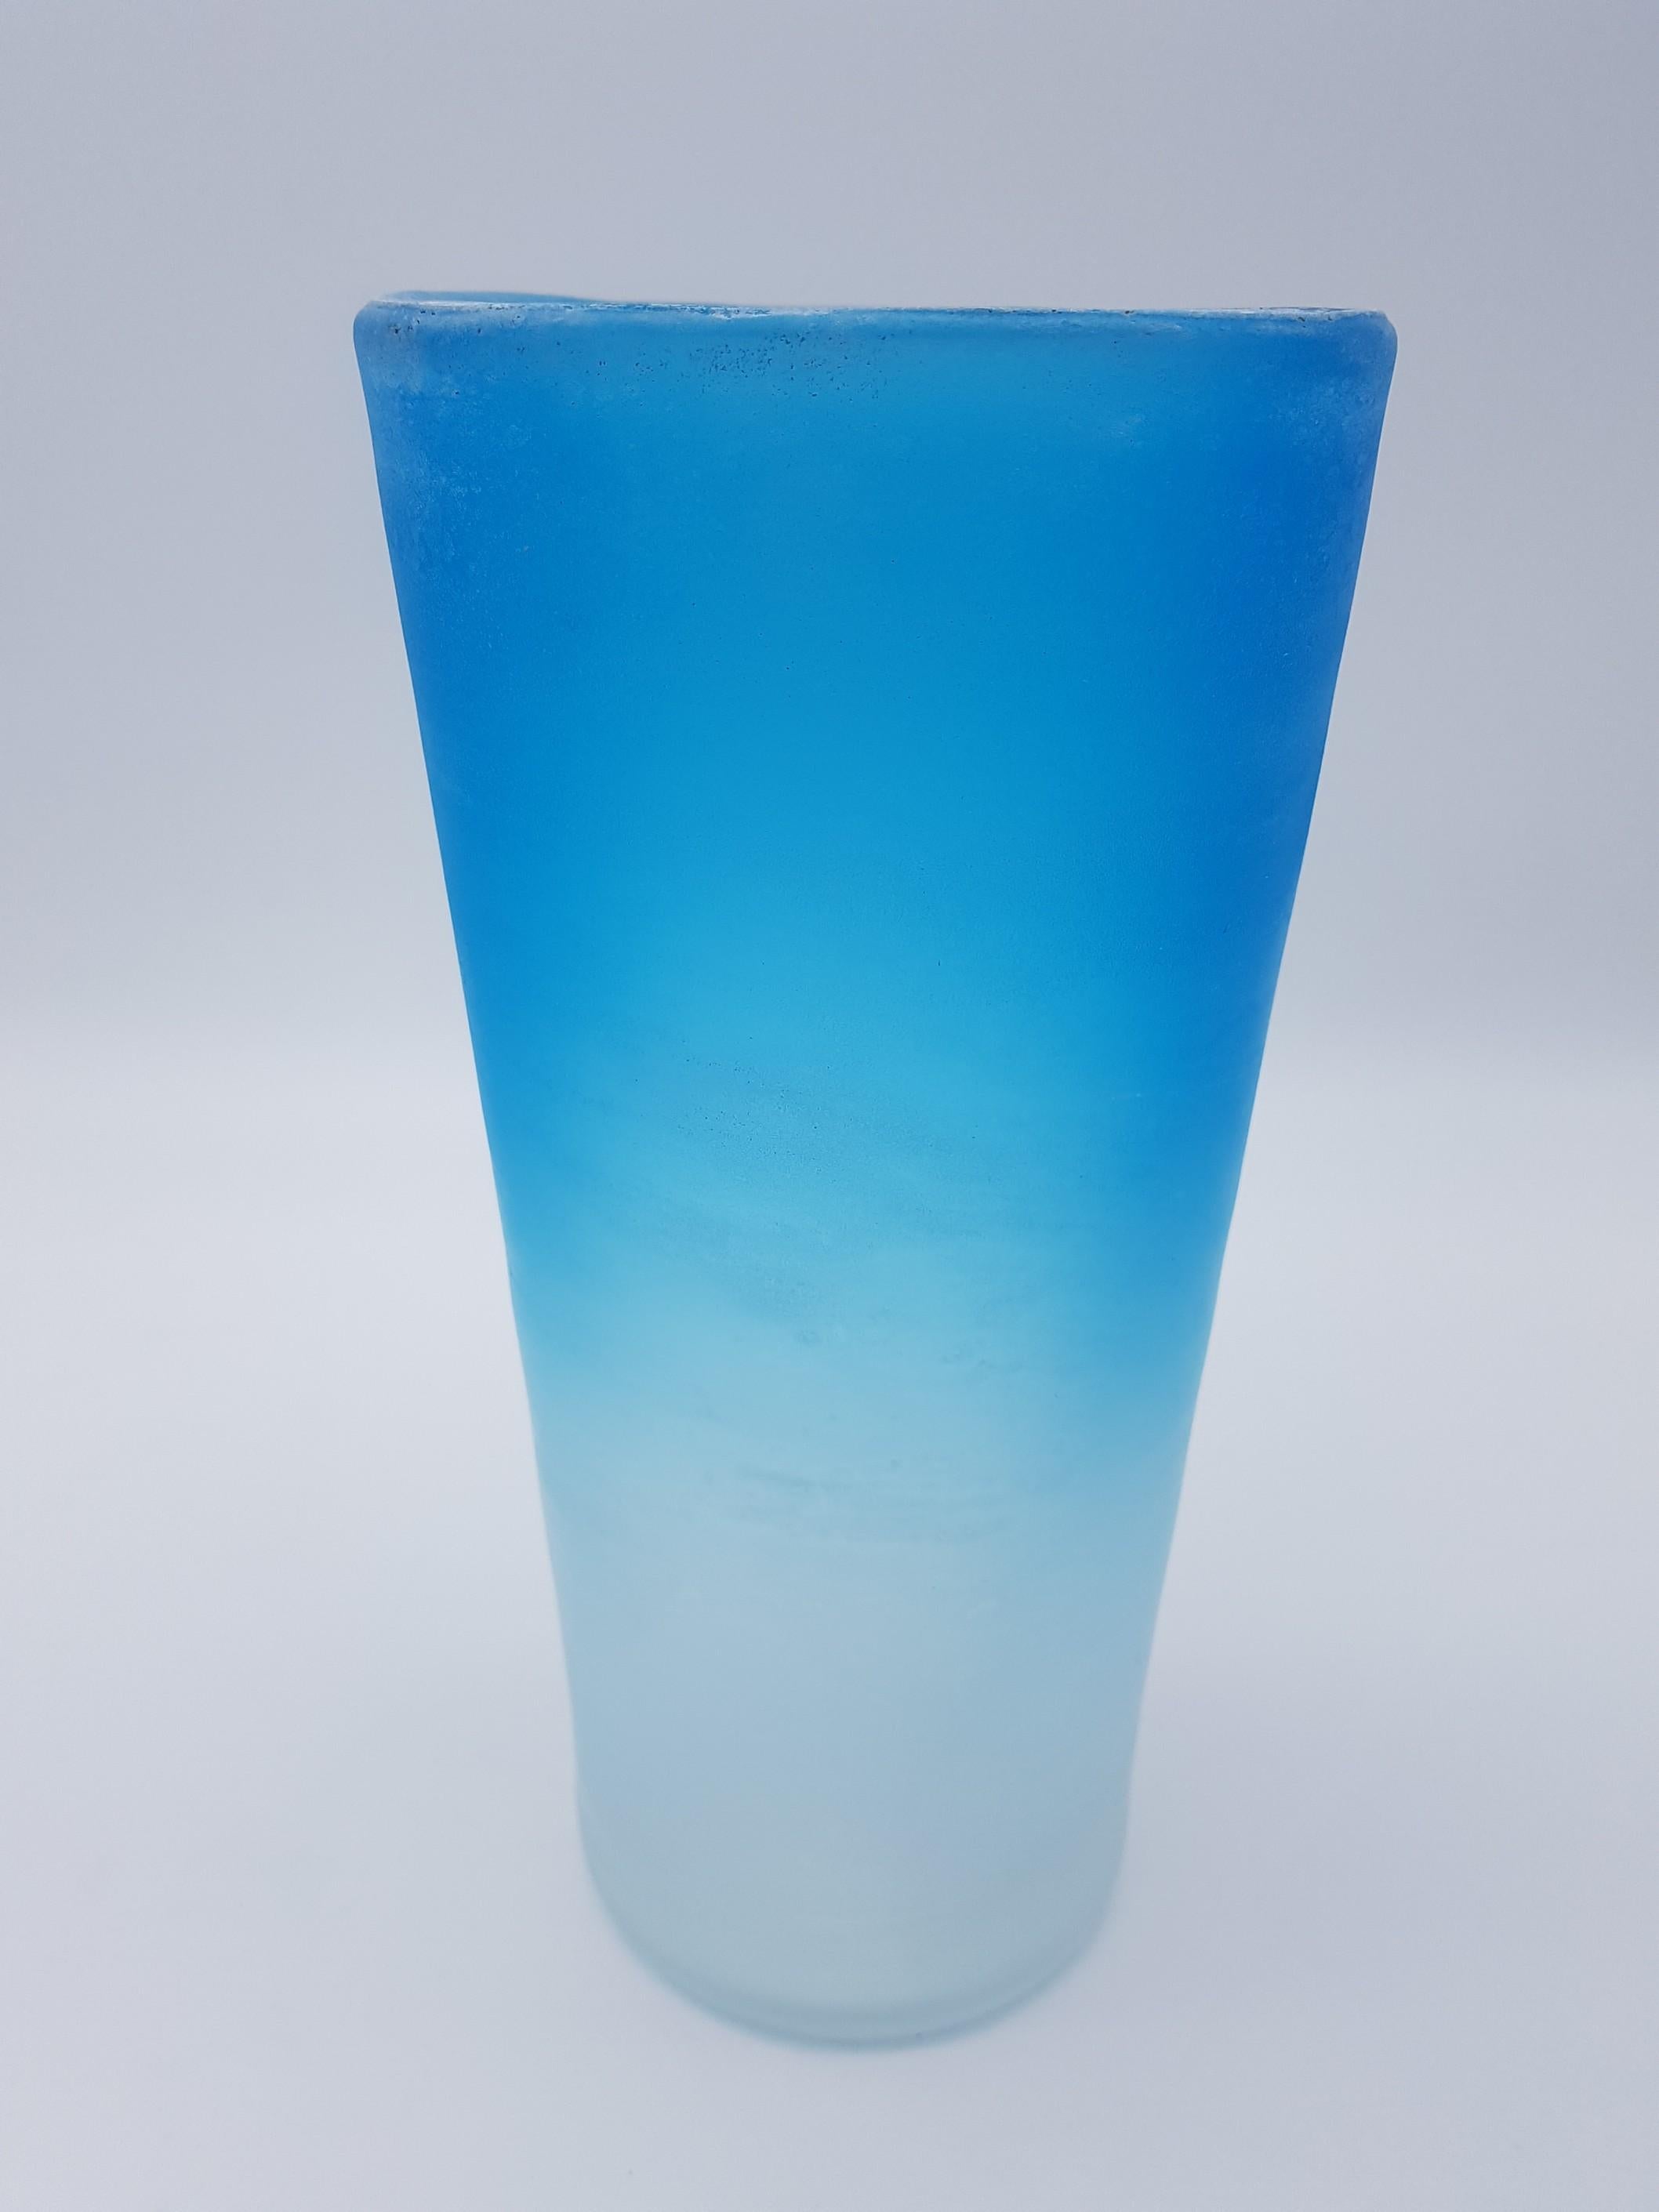 Late 20th Century Modern Murano Glass Vase, Blue Color in 